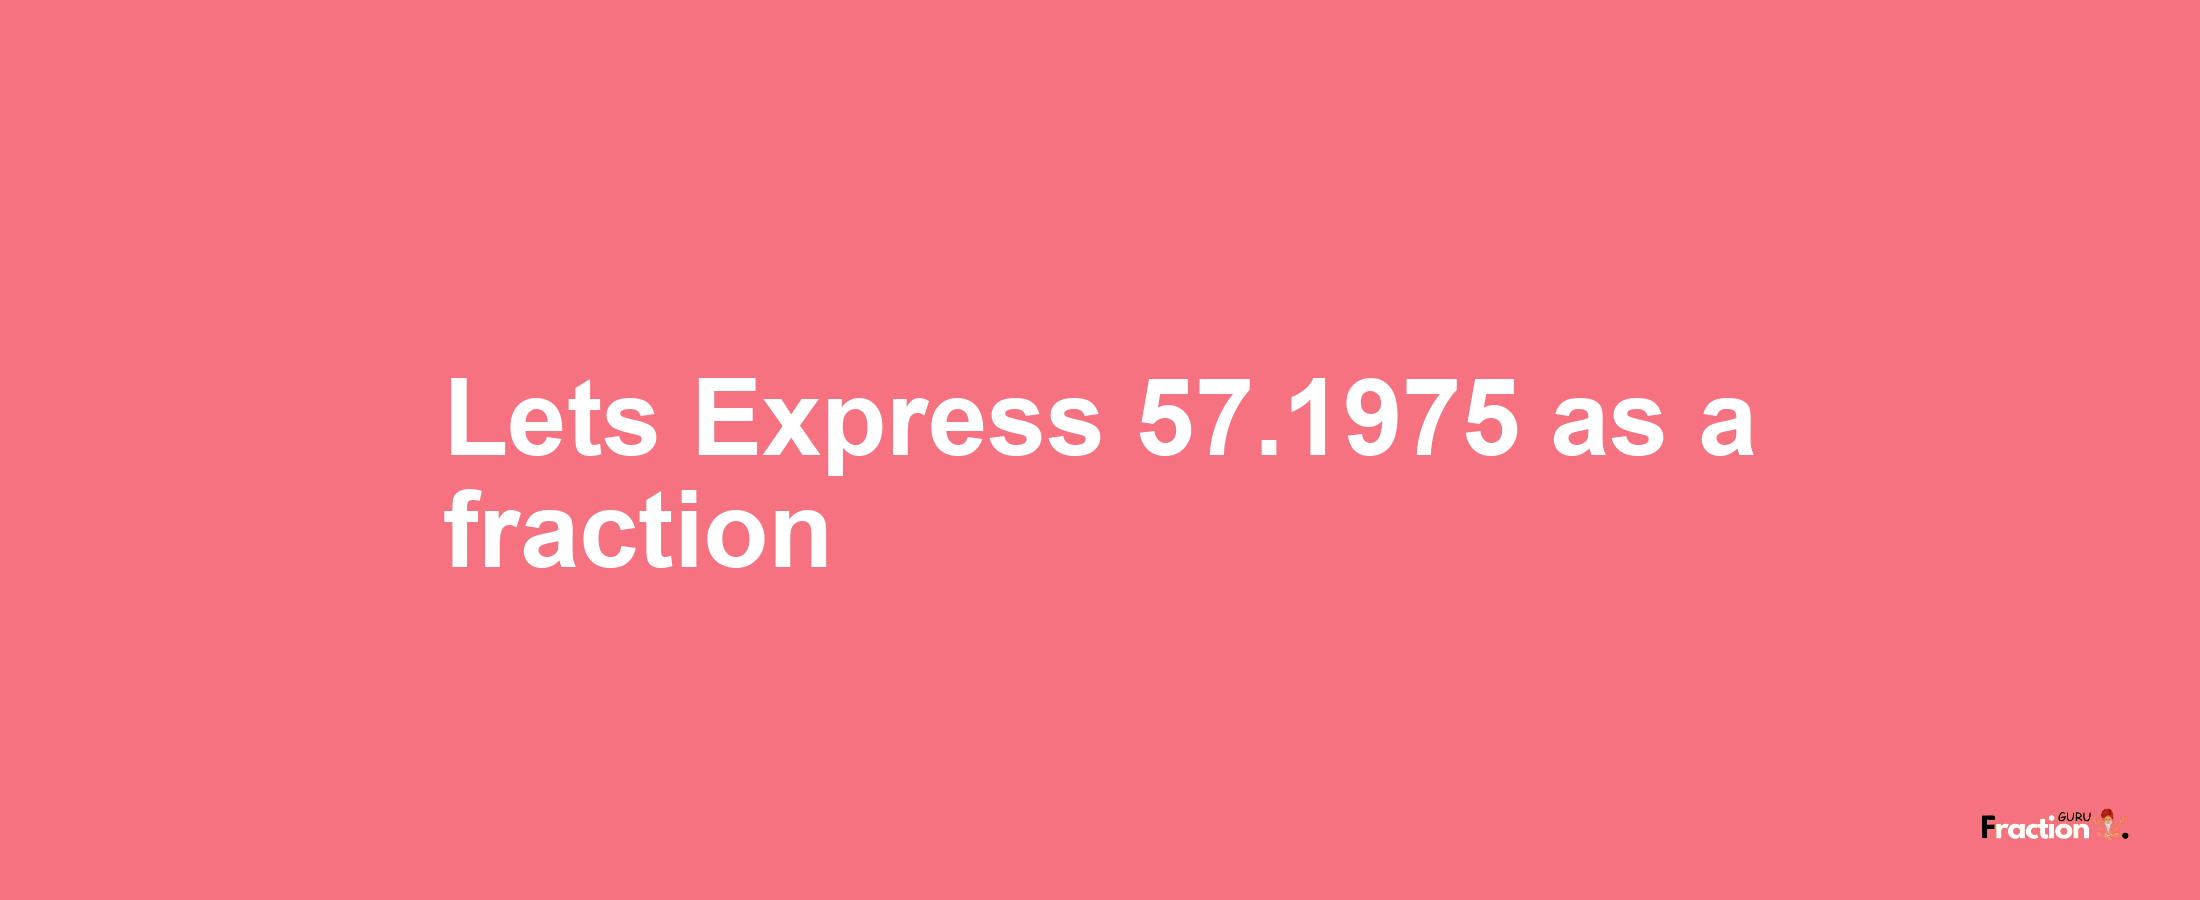 Lets Express 57.1975 as afraction